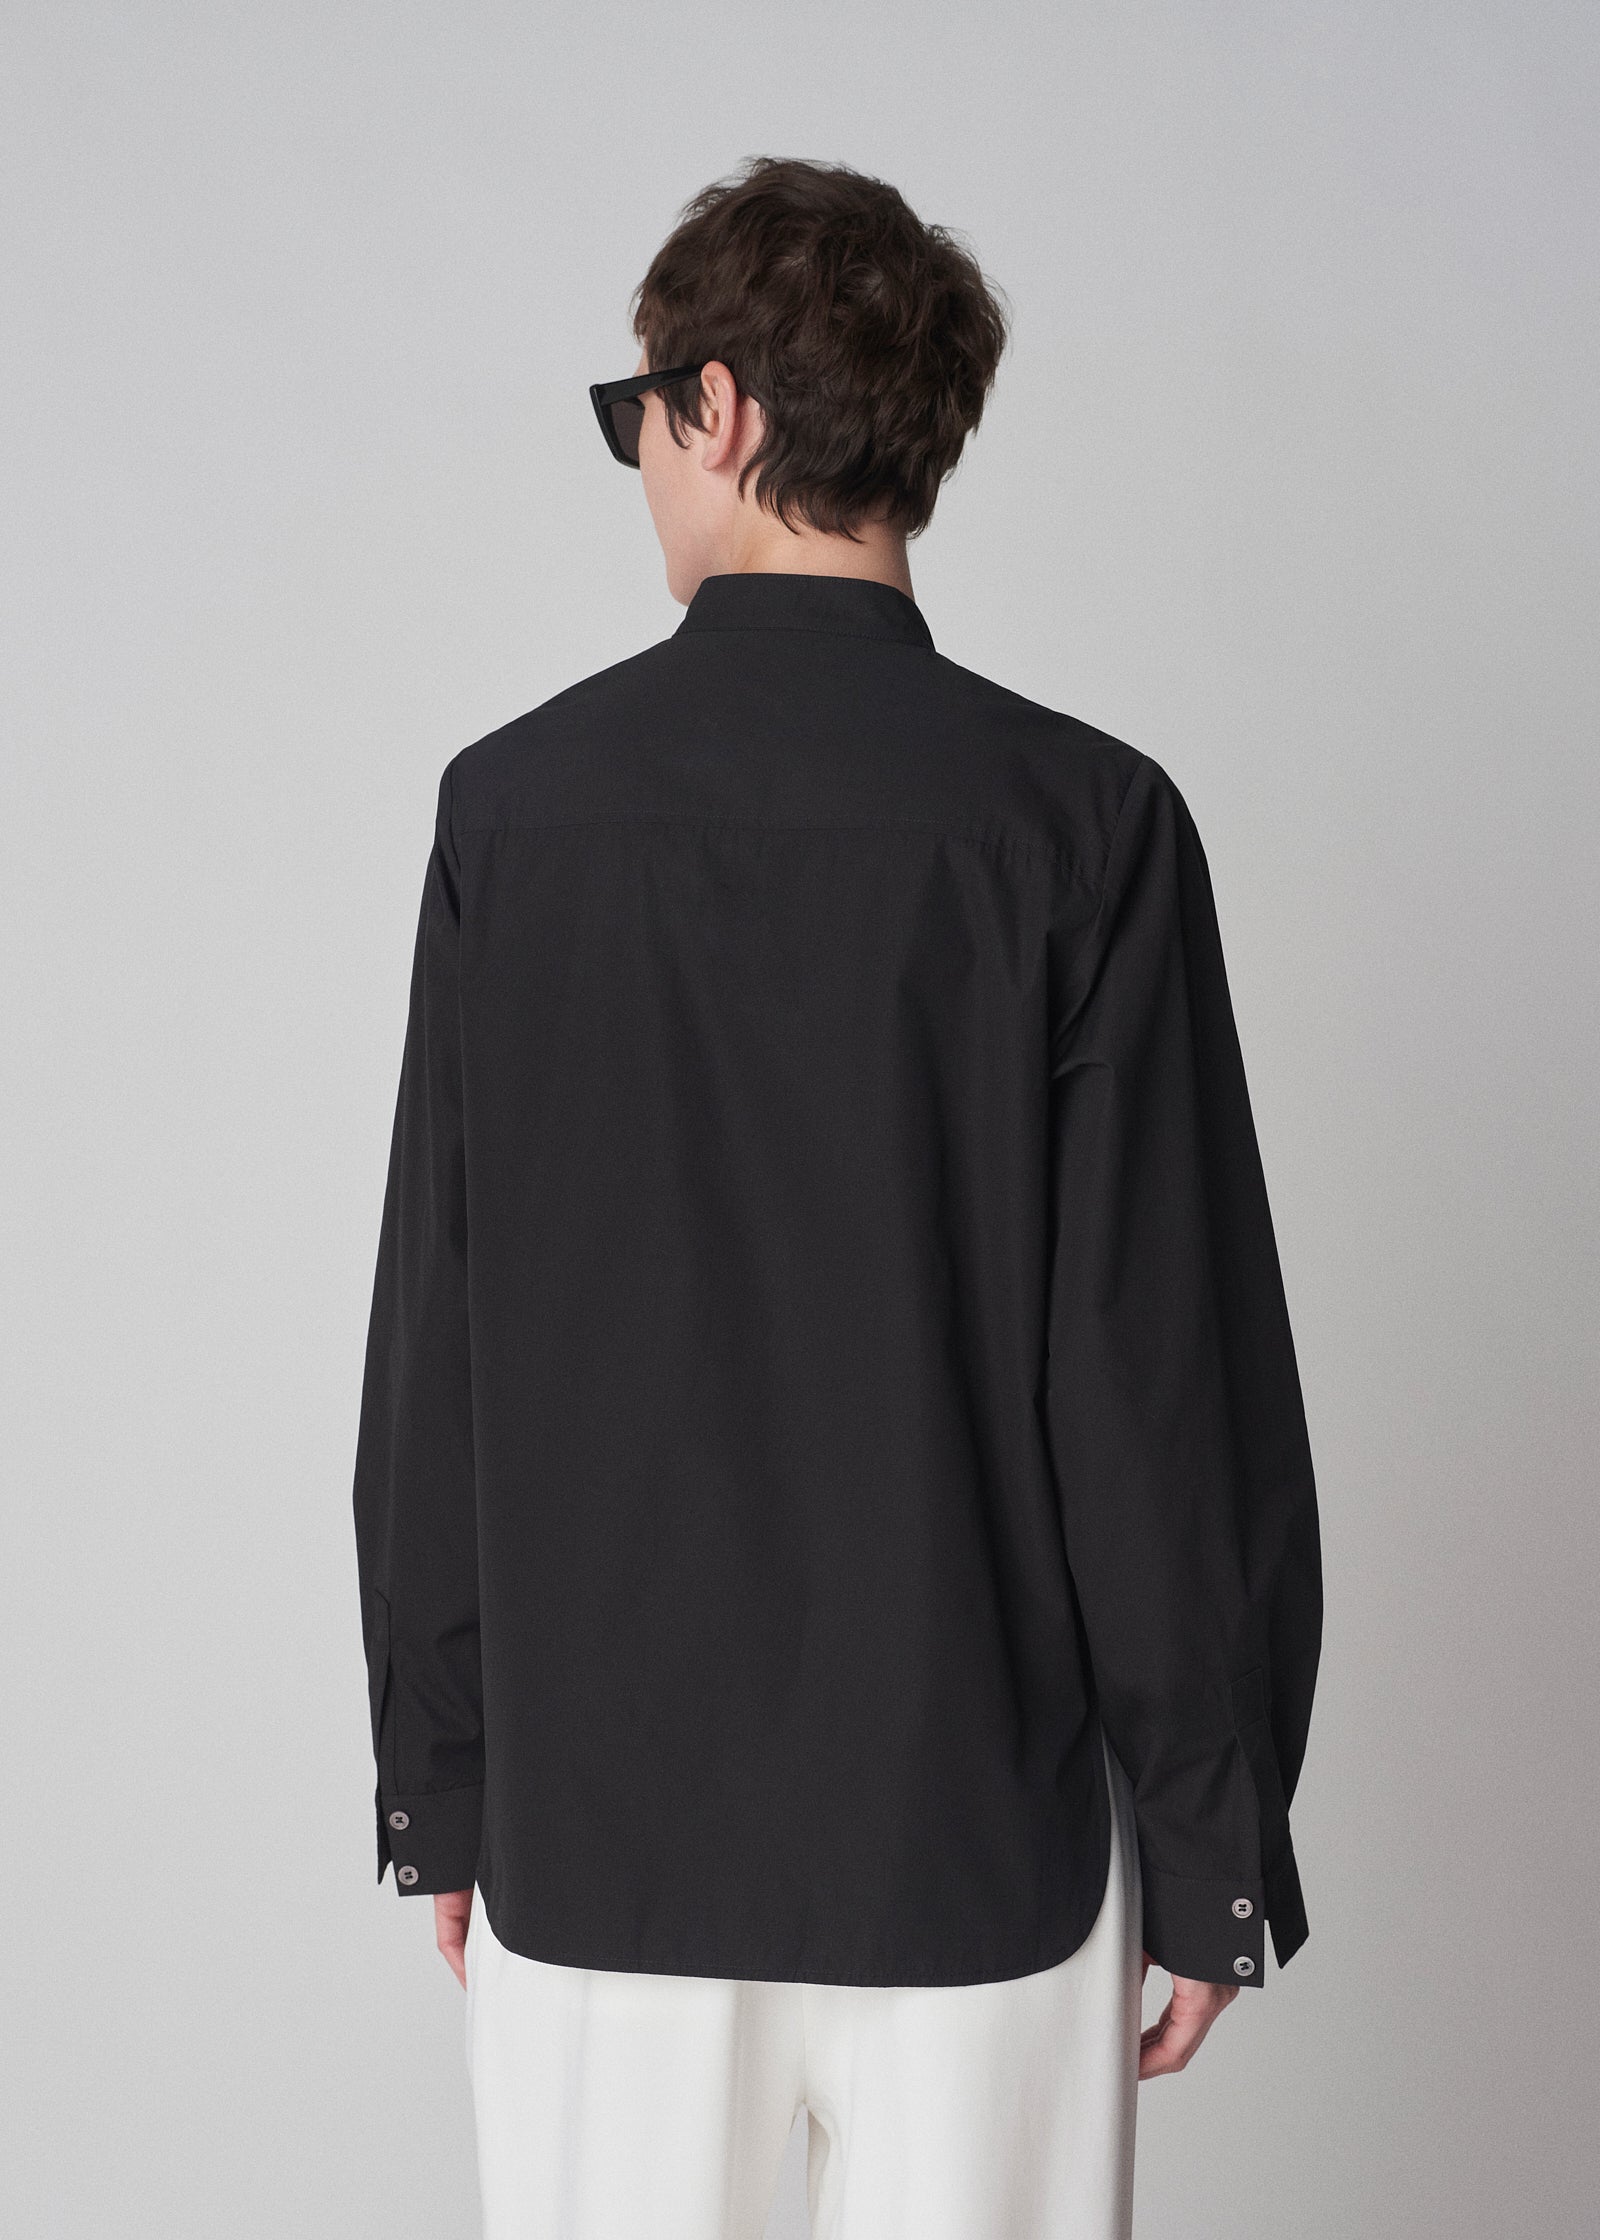 Bib Front Tuxedo Shirt in Cotton - Black - CO Collections